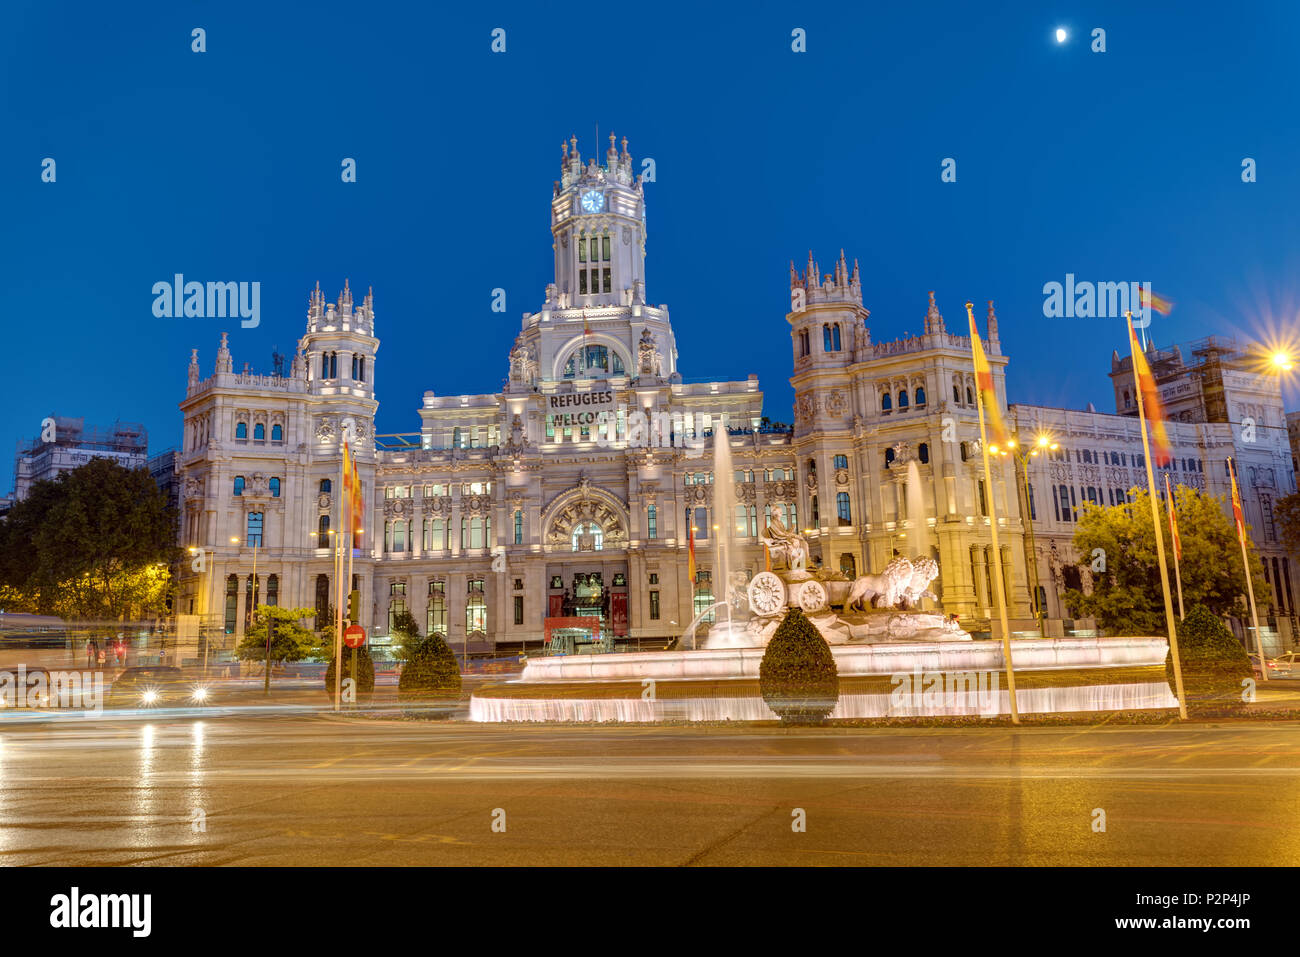 Plaza de Cibeles in Madrid with the Palace of Communication at night Stock Photo